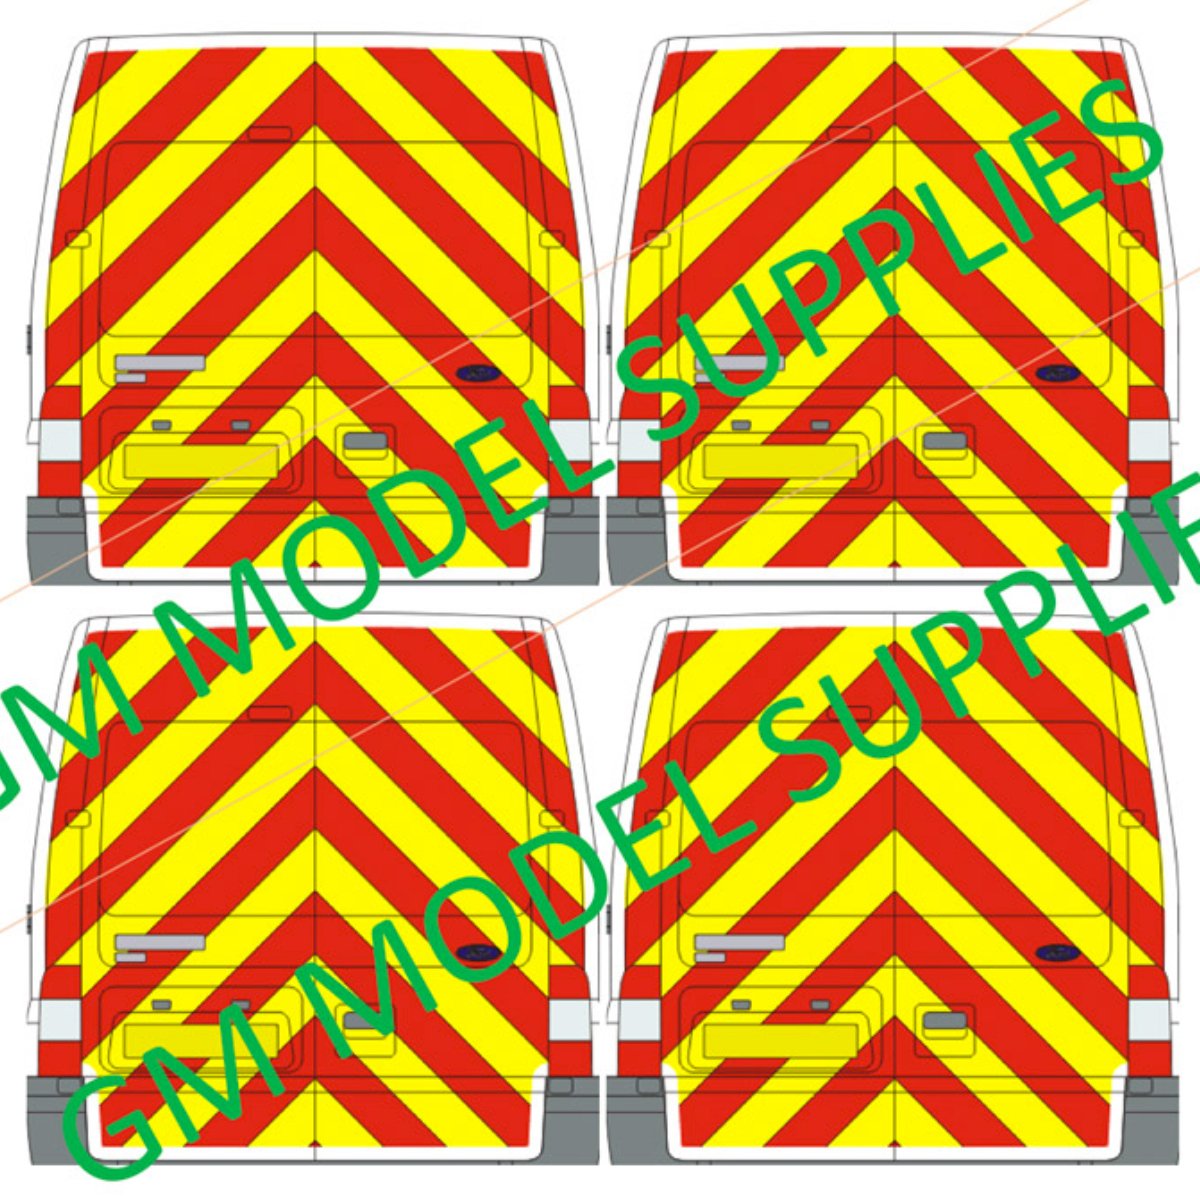 Transit SWB Rear Conversion Kit - Yellow/Red Chevrons (1:76 Scale Decals) - Phillips Hobbies